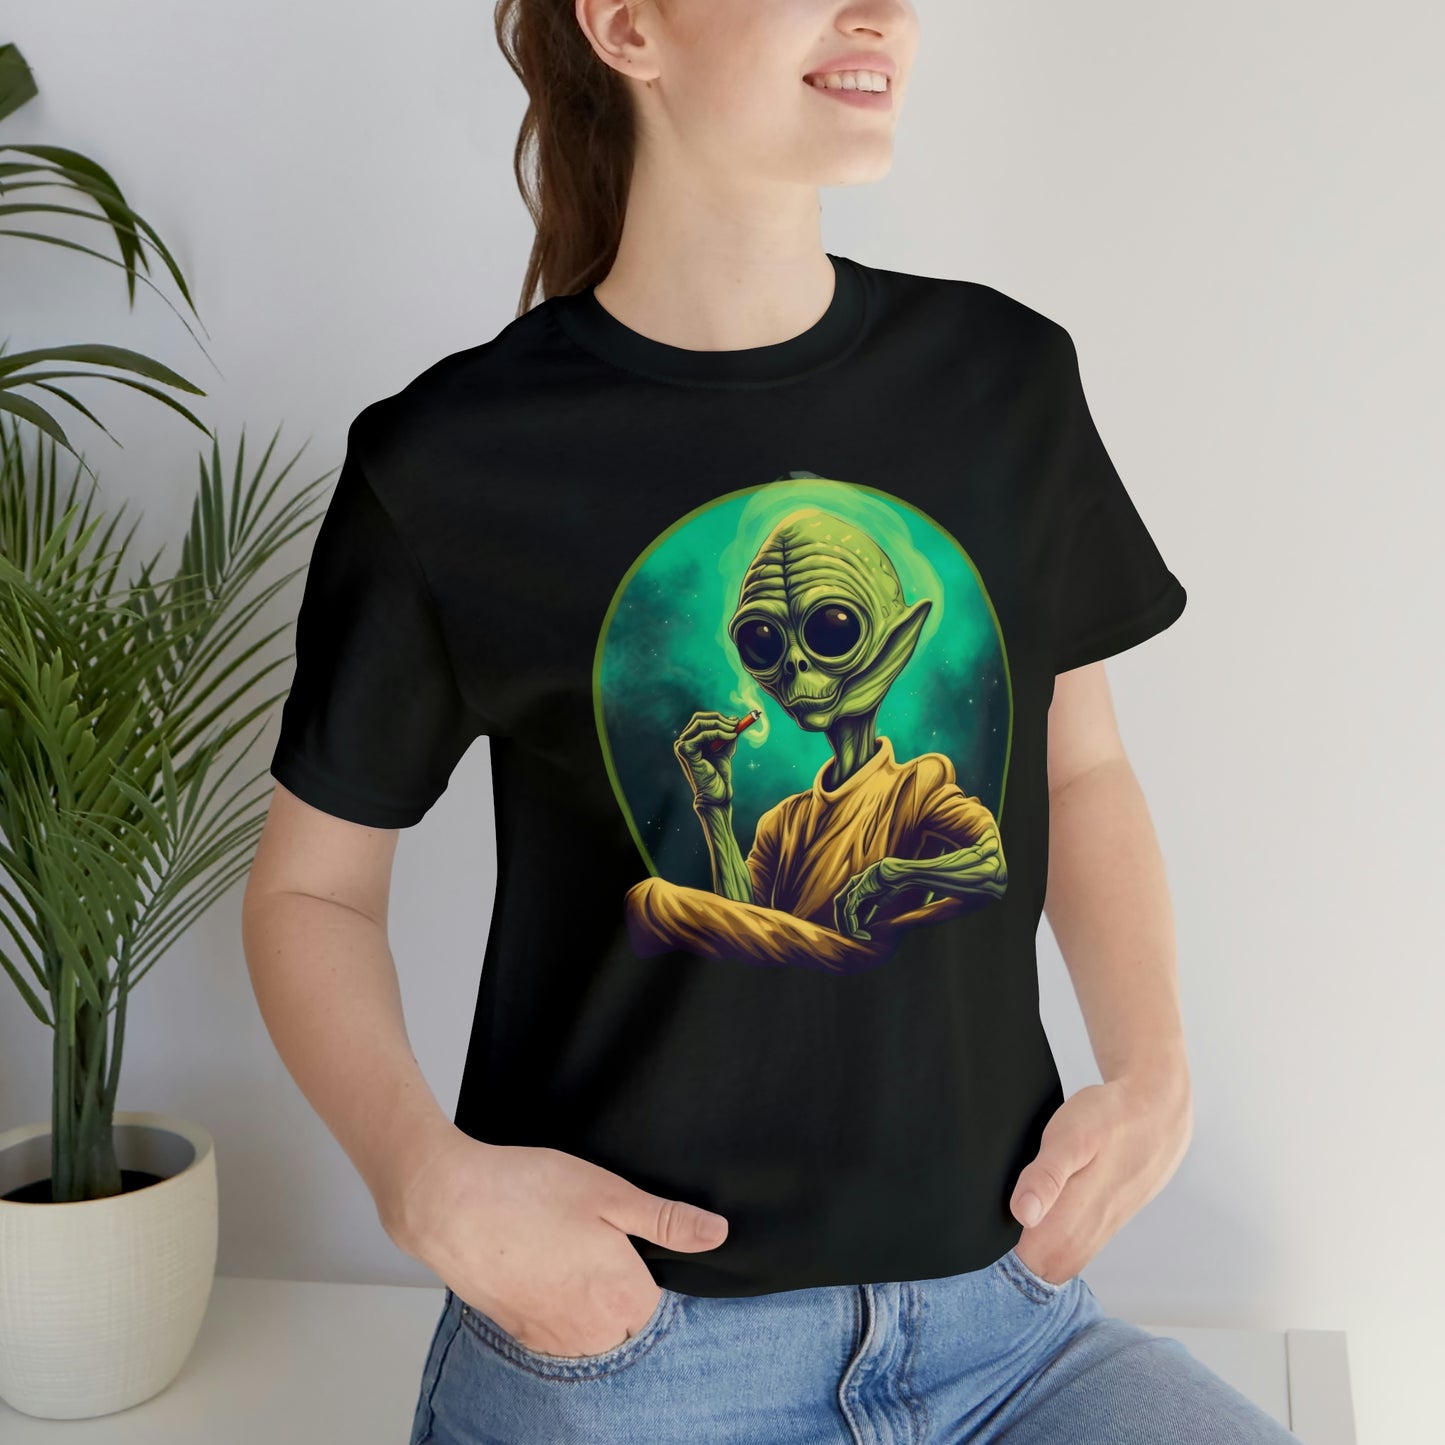 Smoking Chill Alien: Embrace New Age Living & Discover Your Cosmic Connection